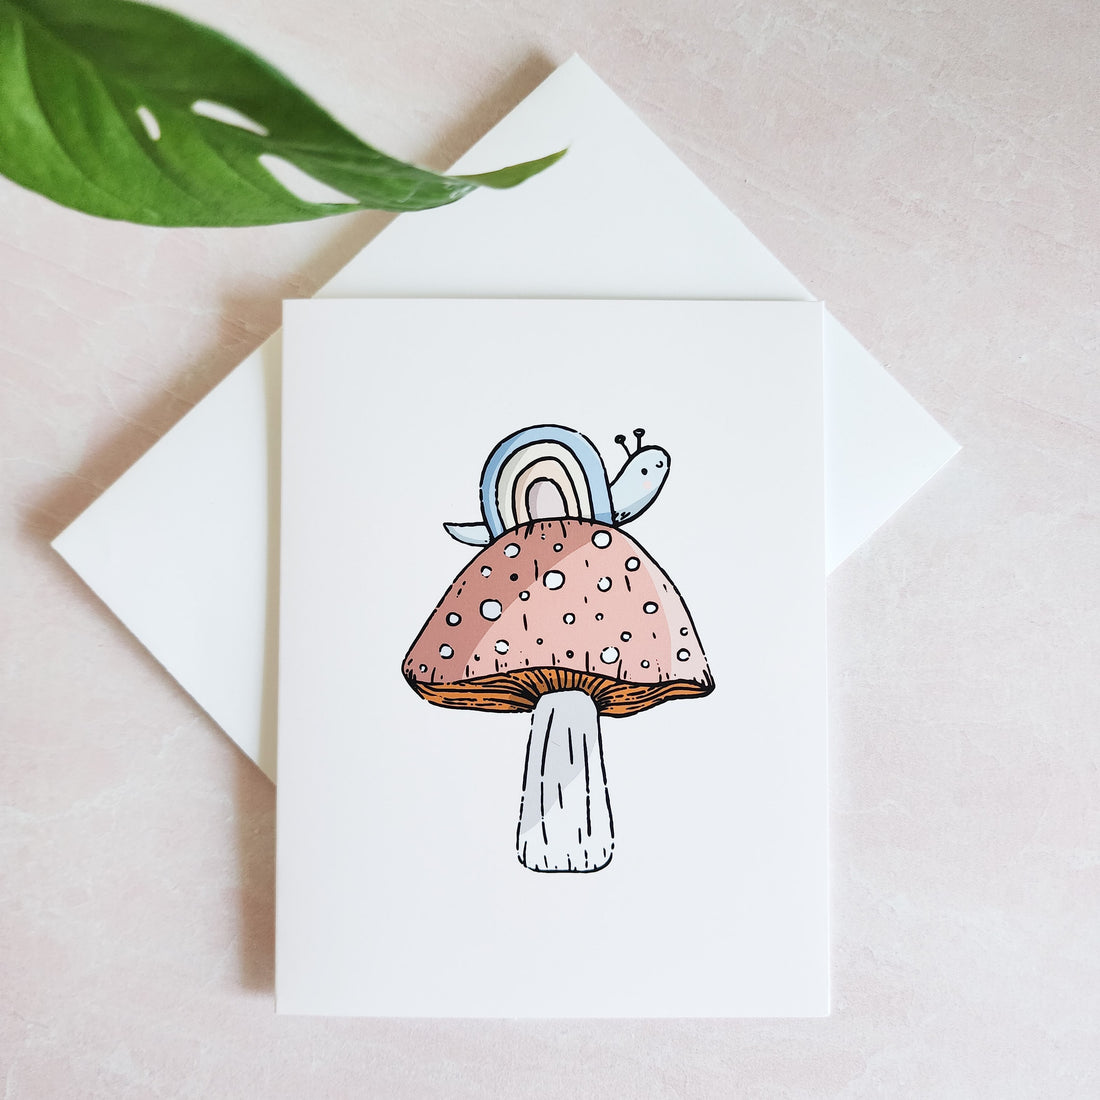 rainbow snail greeting card on top of a white envelope